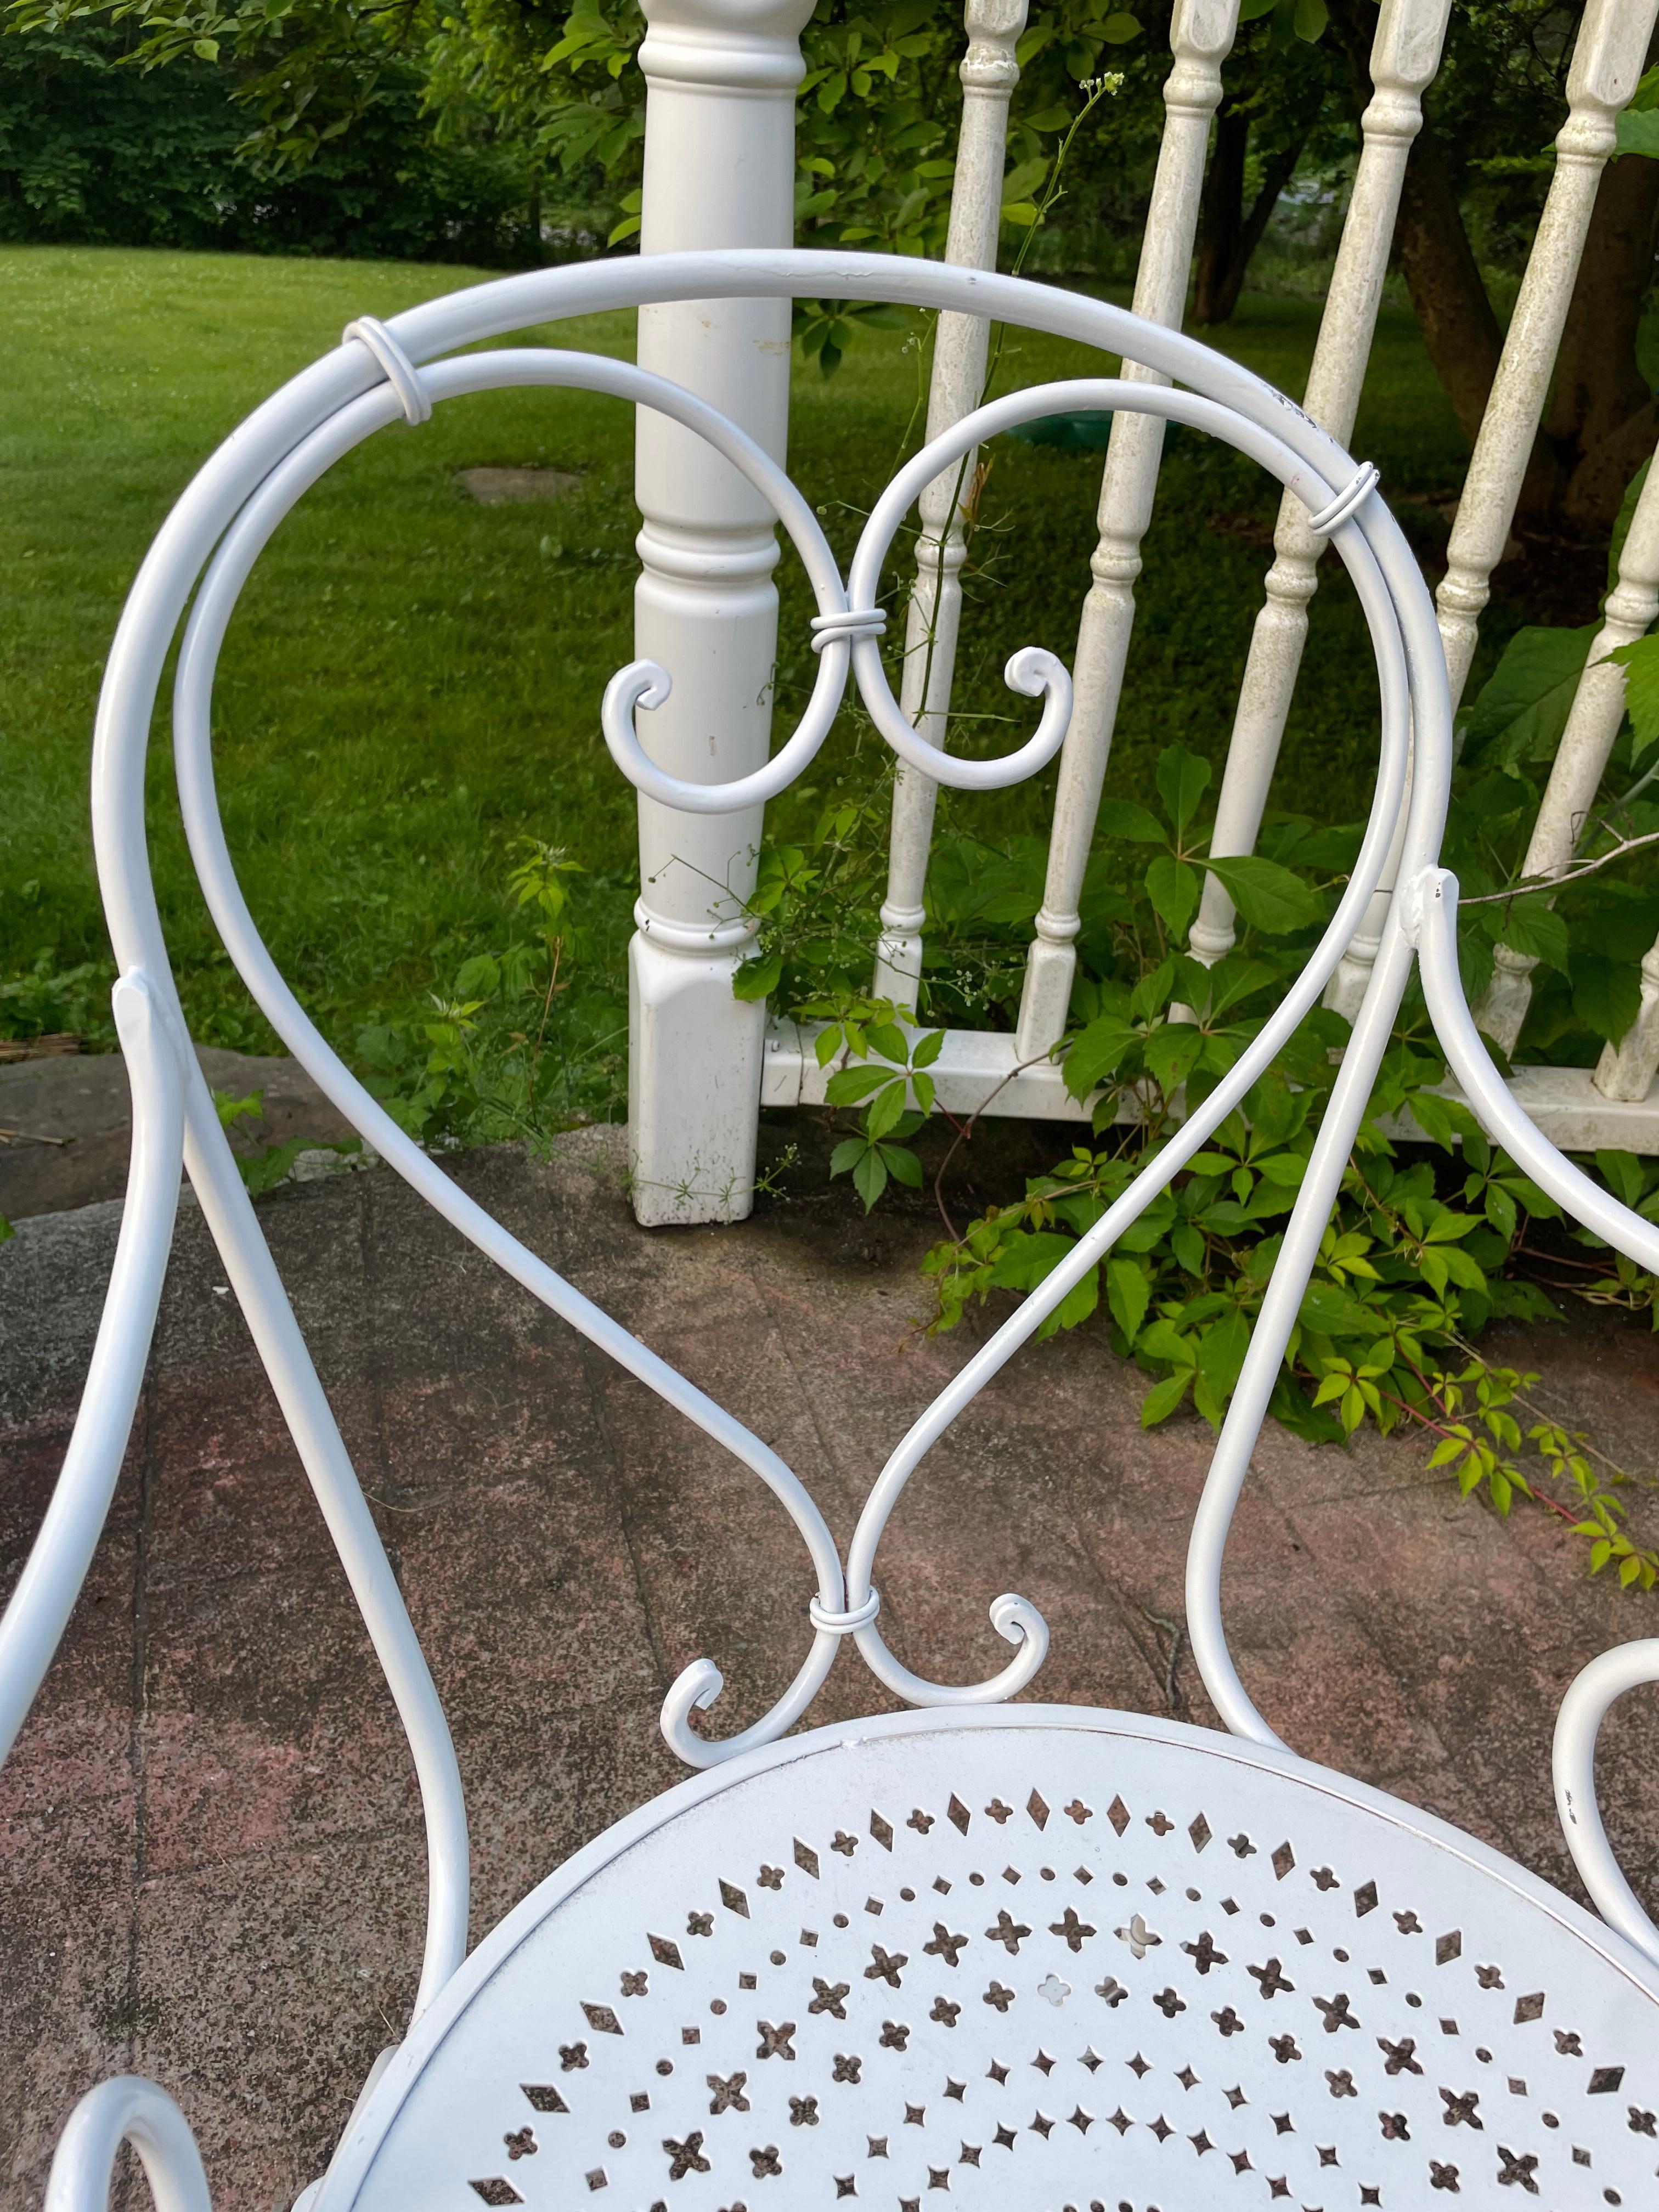 Vintage Wrought Iron French Cafe Bistro Set

Adorable seating for 2. Well proportioned table of 32 inches perfect for any evening out on the terrace, in the garden, or pool side. Folding table provides the convenience of easy storage. Available